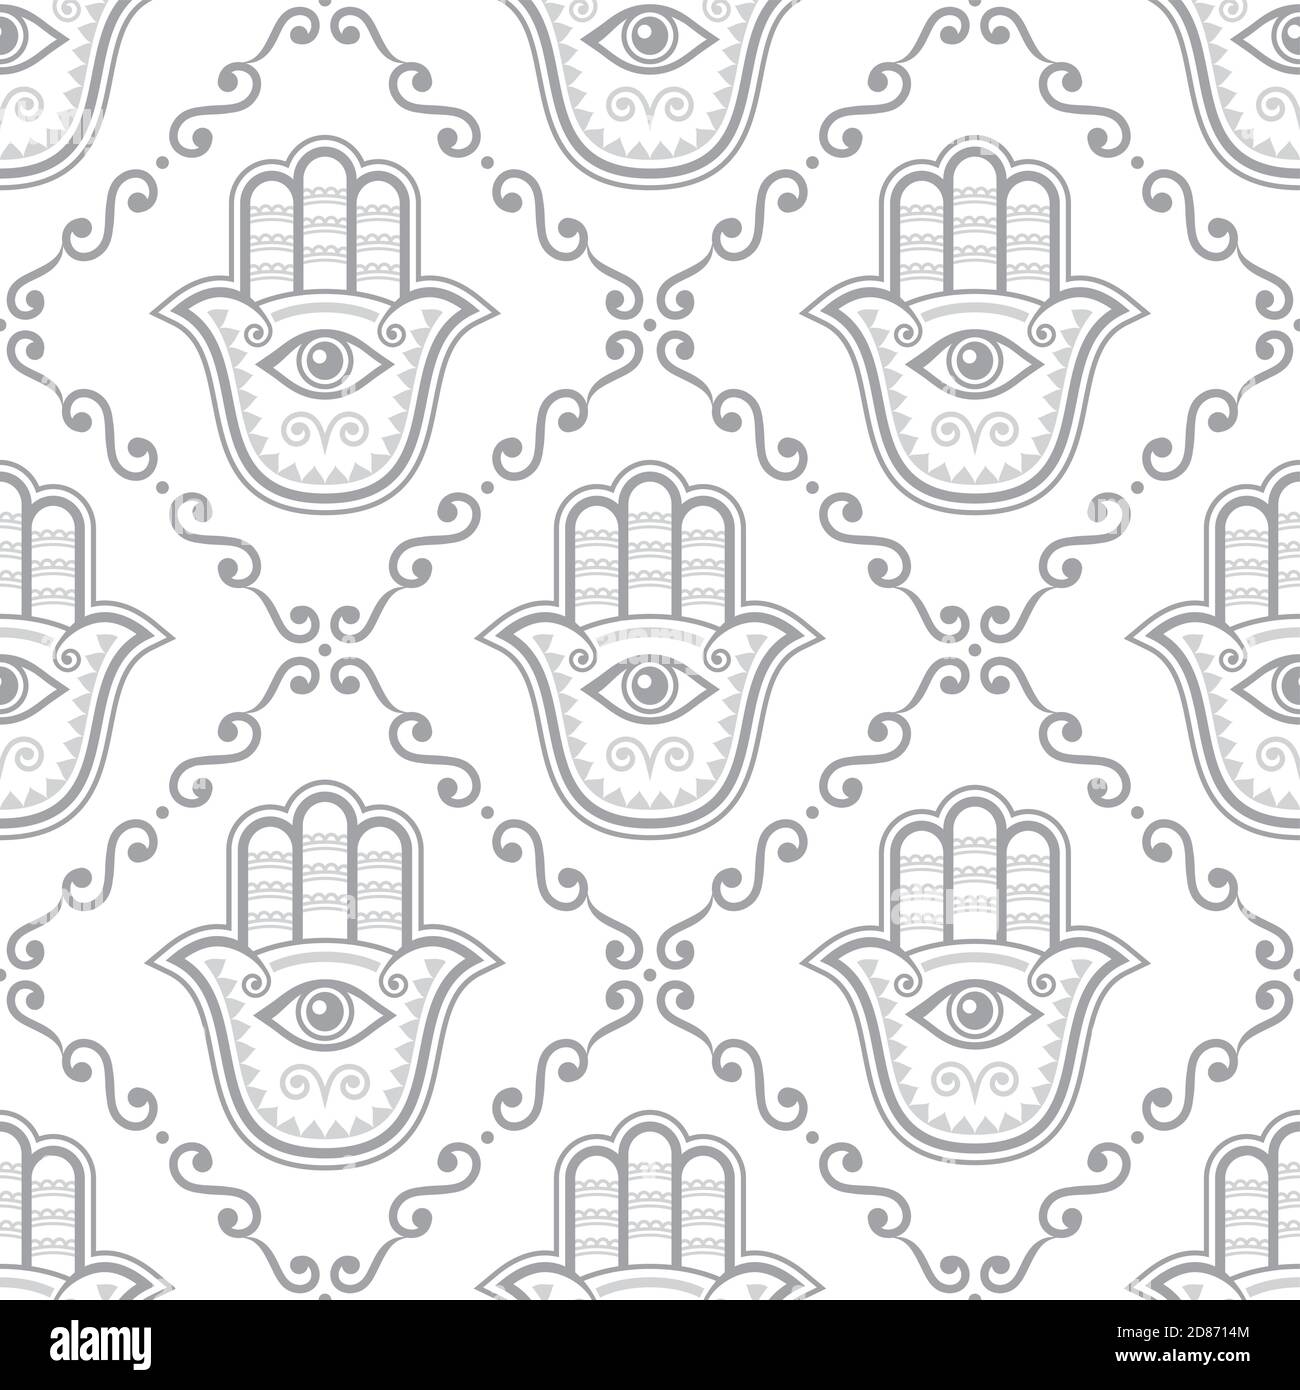 Hamsa hand seamless vector pattern, Khamsa or Hand of Fatima gray repetitive design, symbol of protection from devil eye background Stock Vector